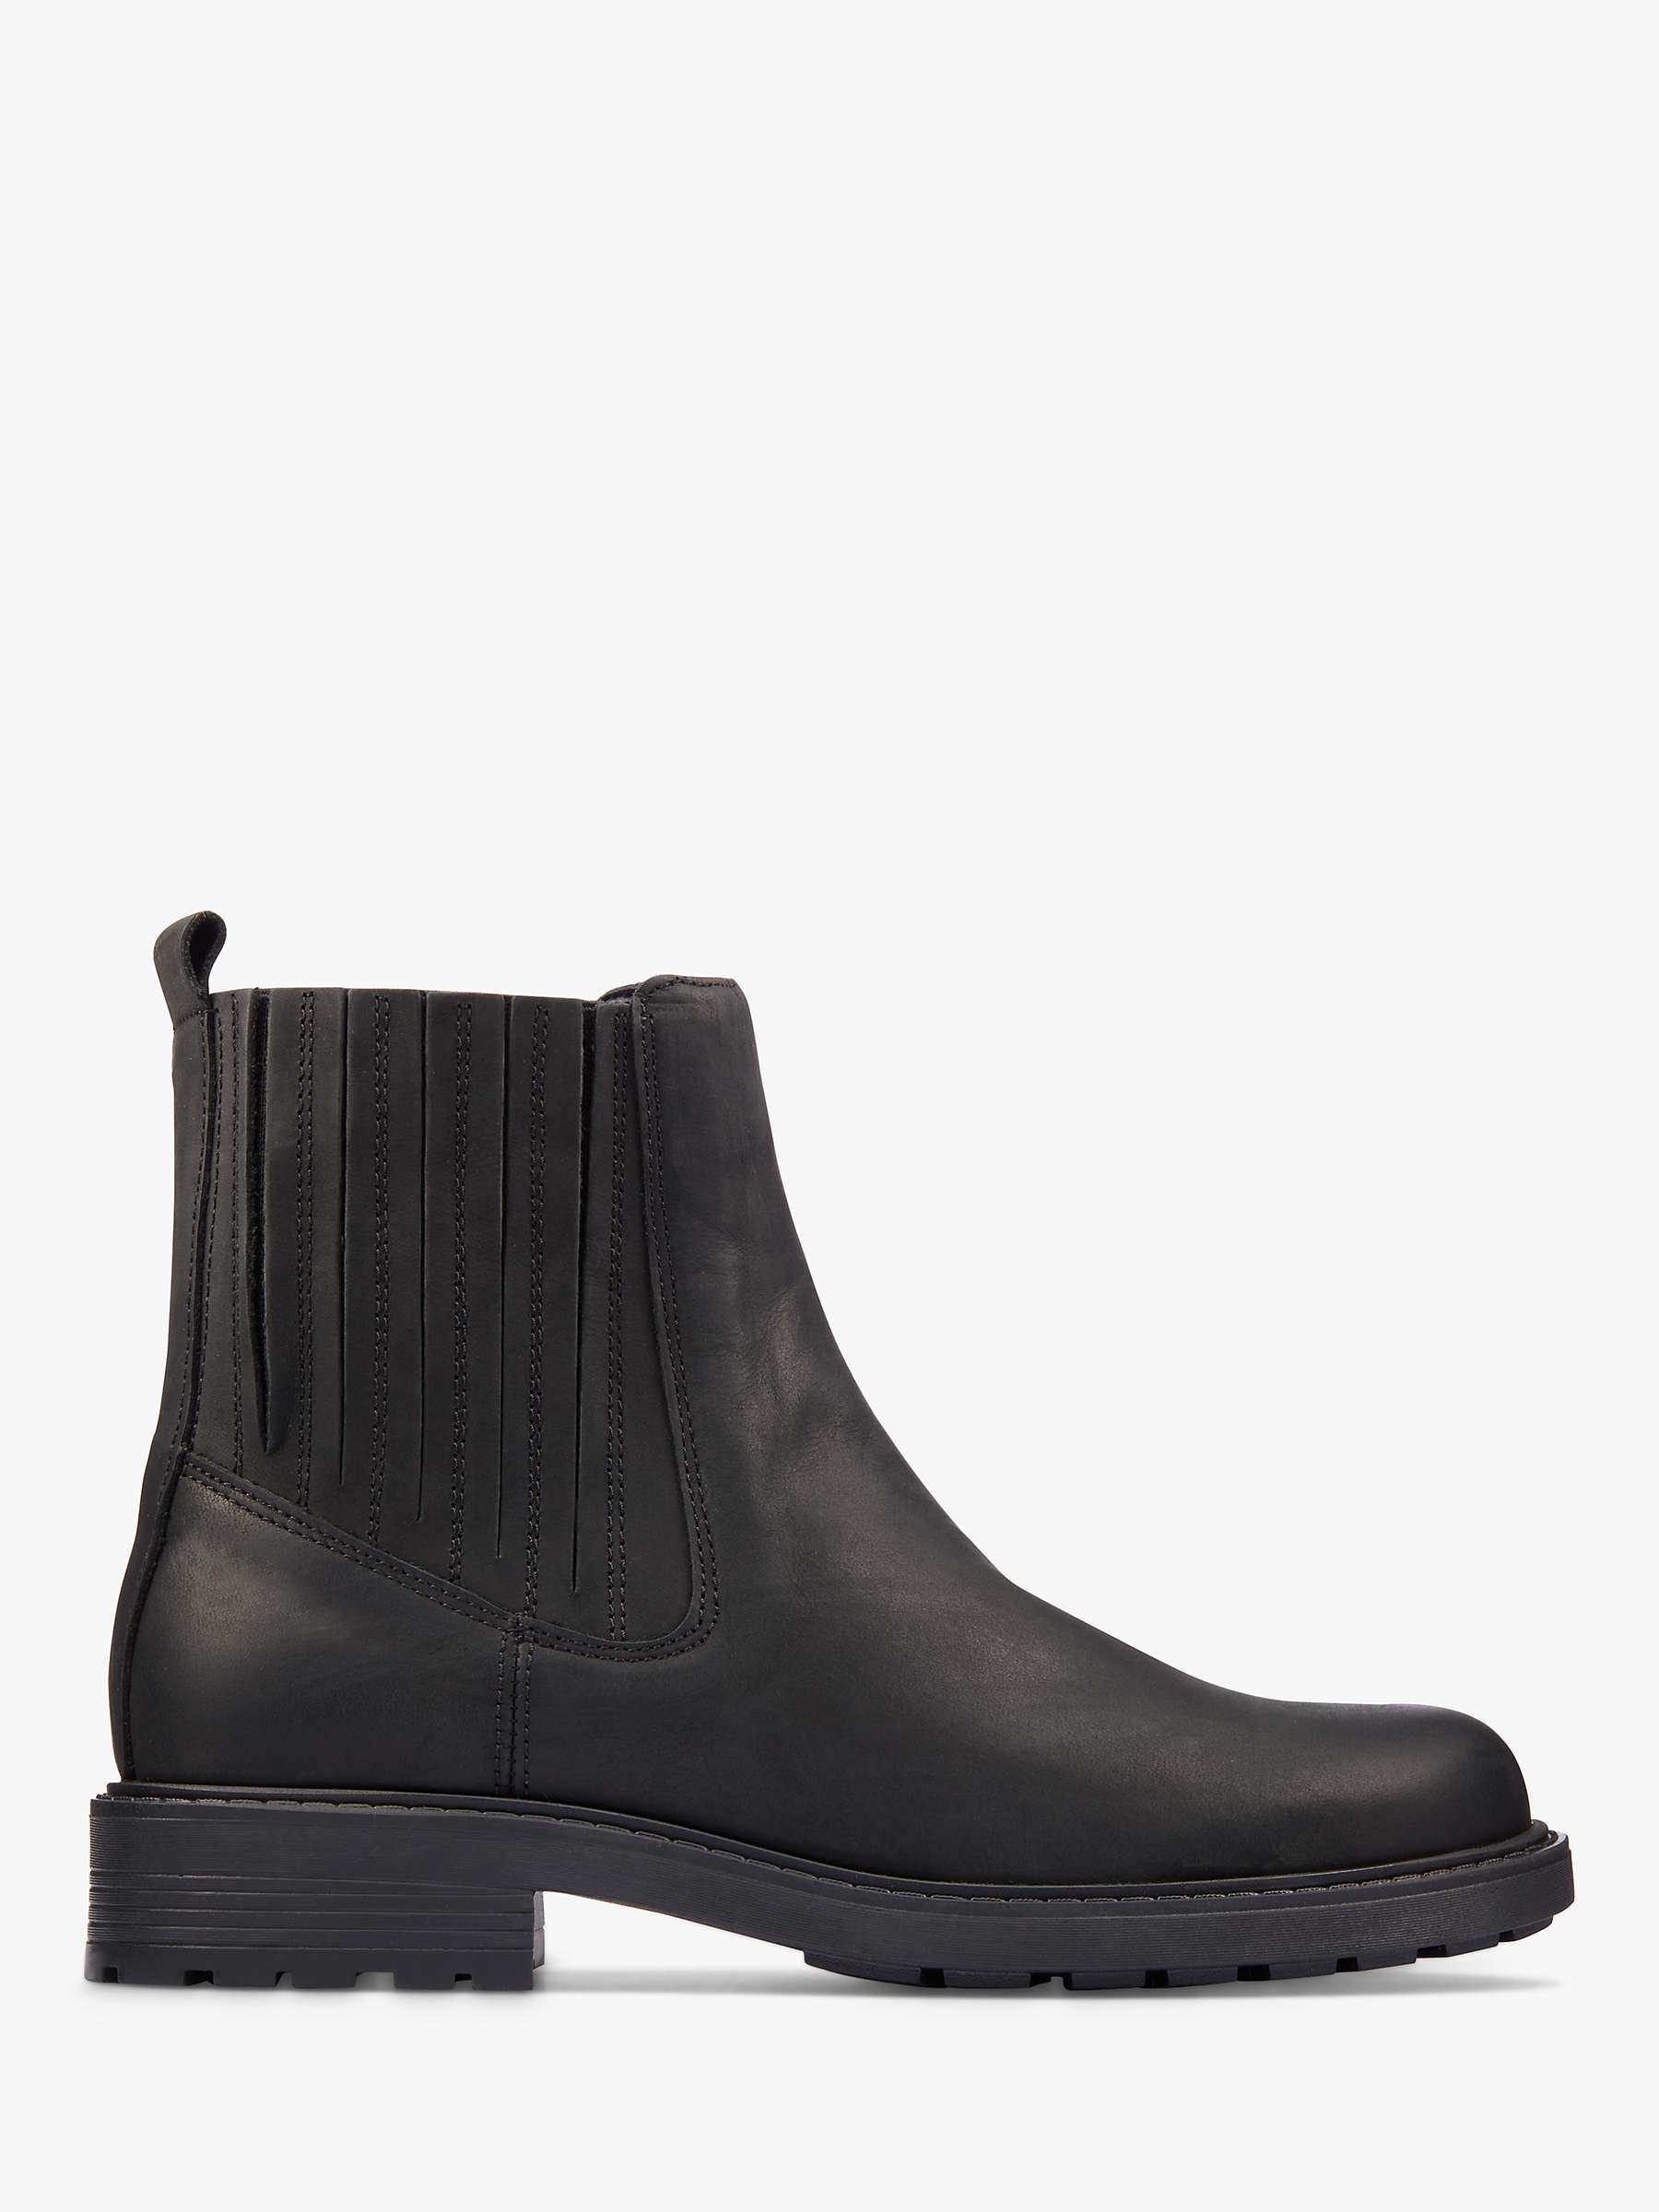 Buy Clarks Orinoco Leather Wide Fit Chelsea Boots Online at johnlewis.com